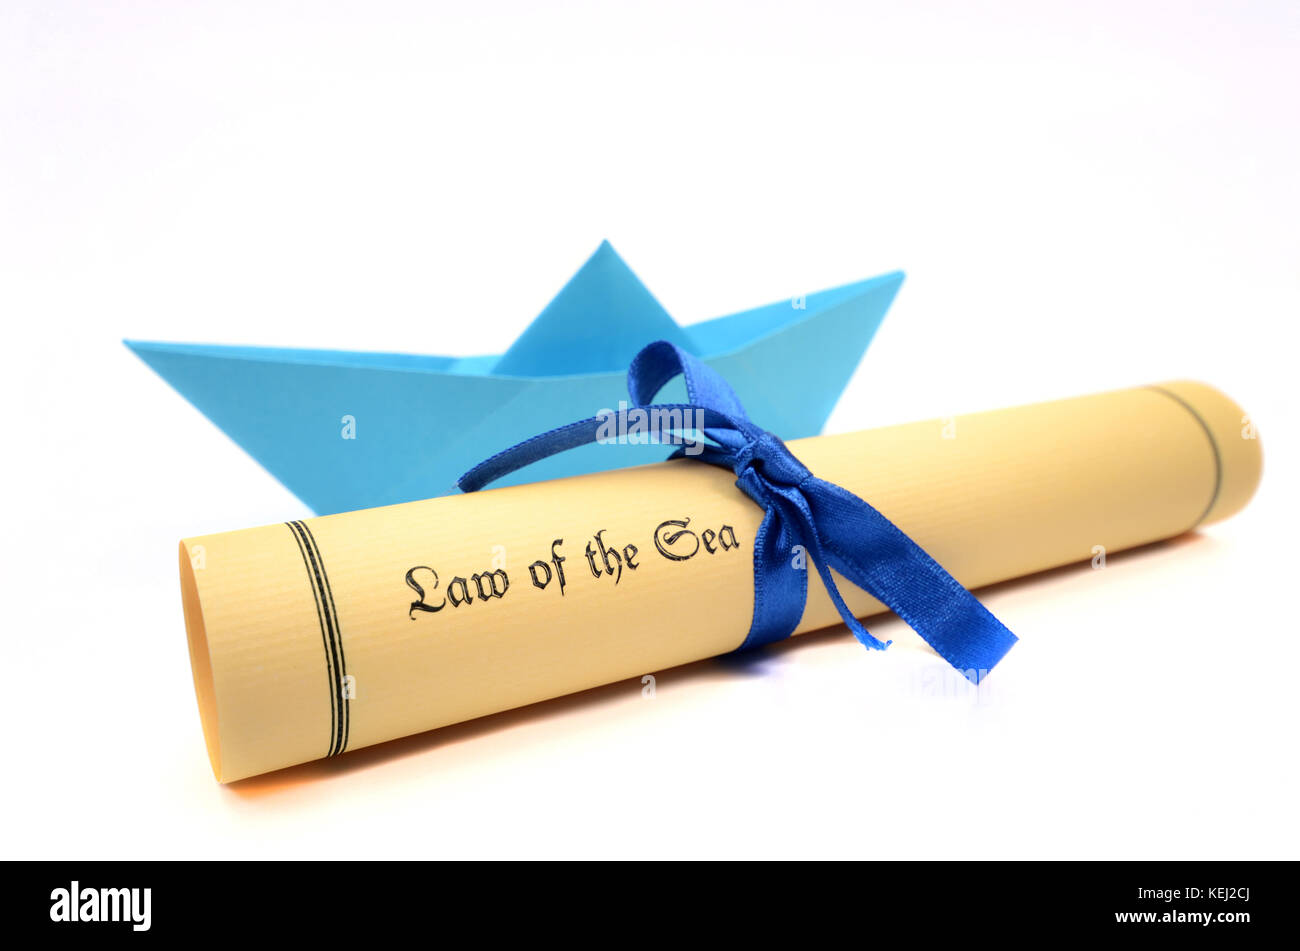 Sea laws, marine laws, navigational regulations, United Nations Convention on the Law of the Sea Stock Photo